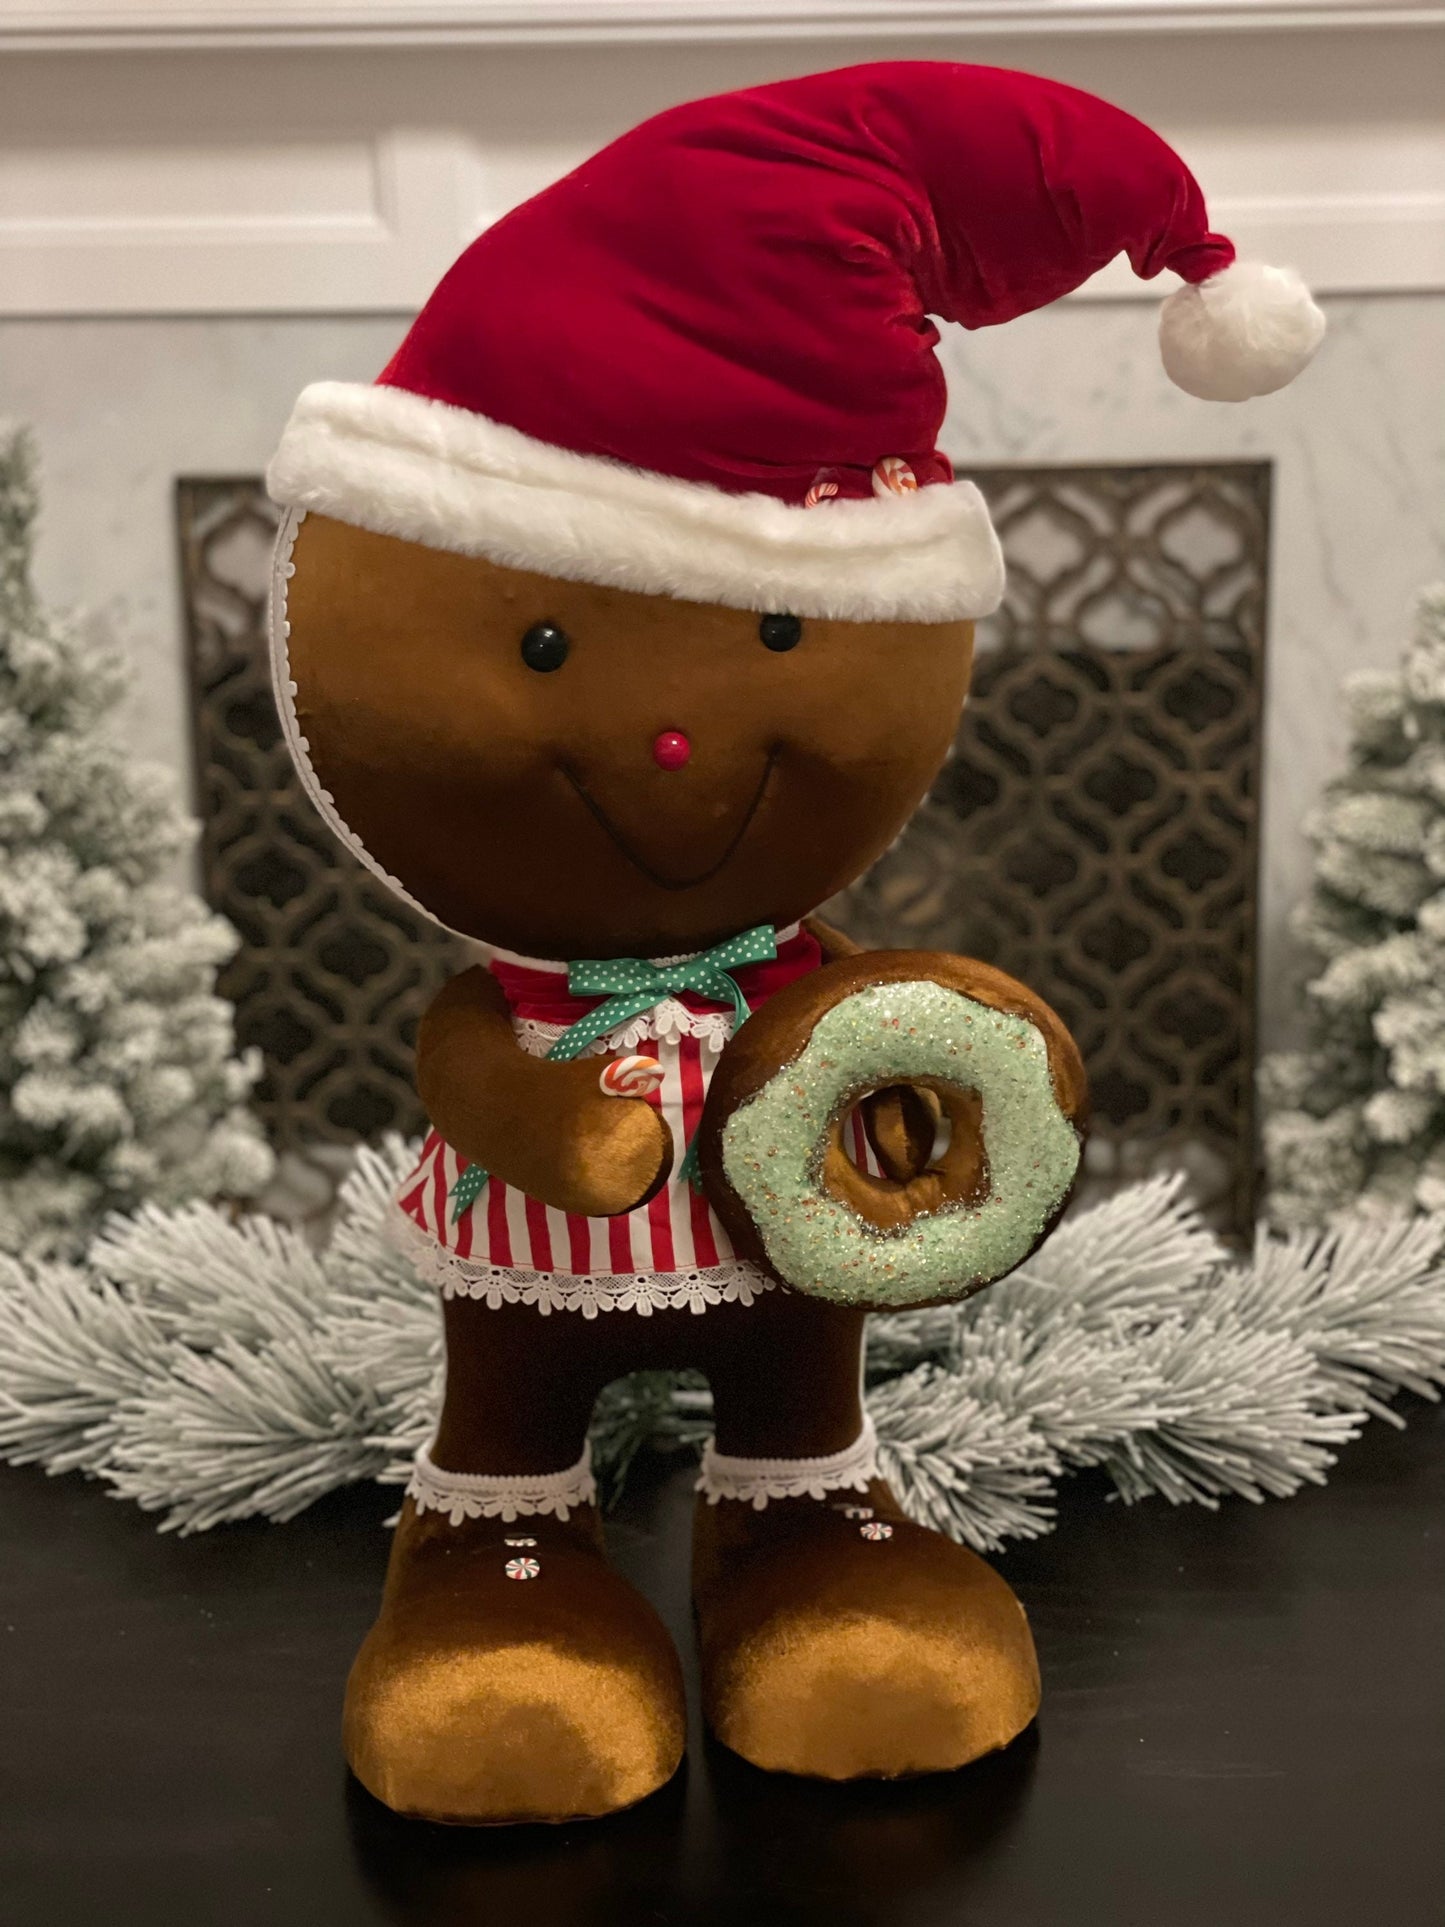 32” Gingerbread with dougnut.